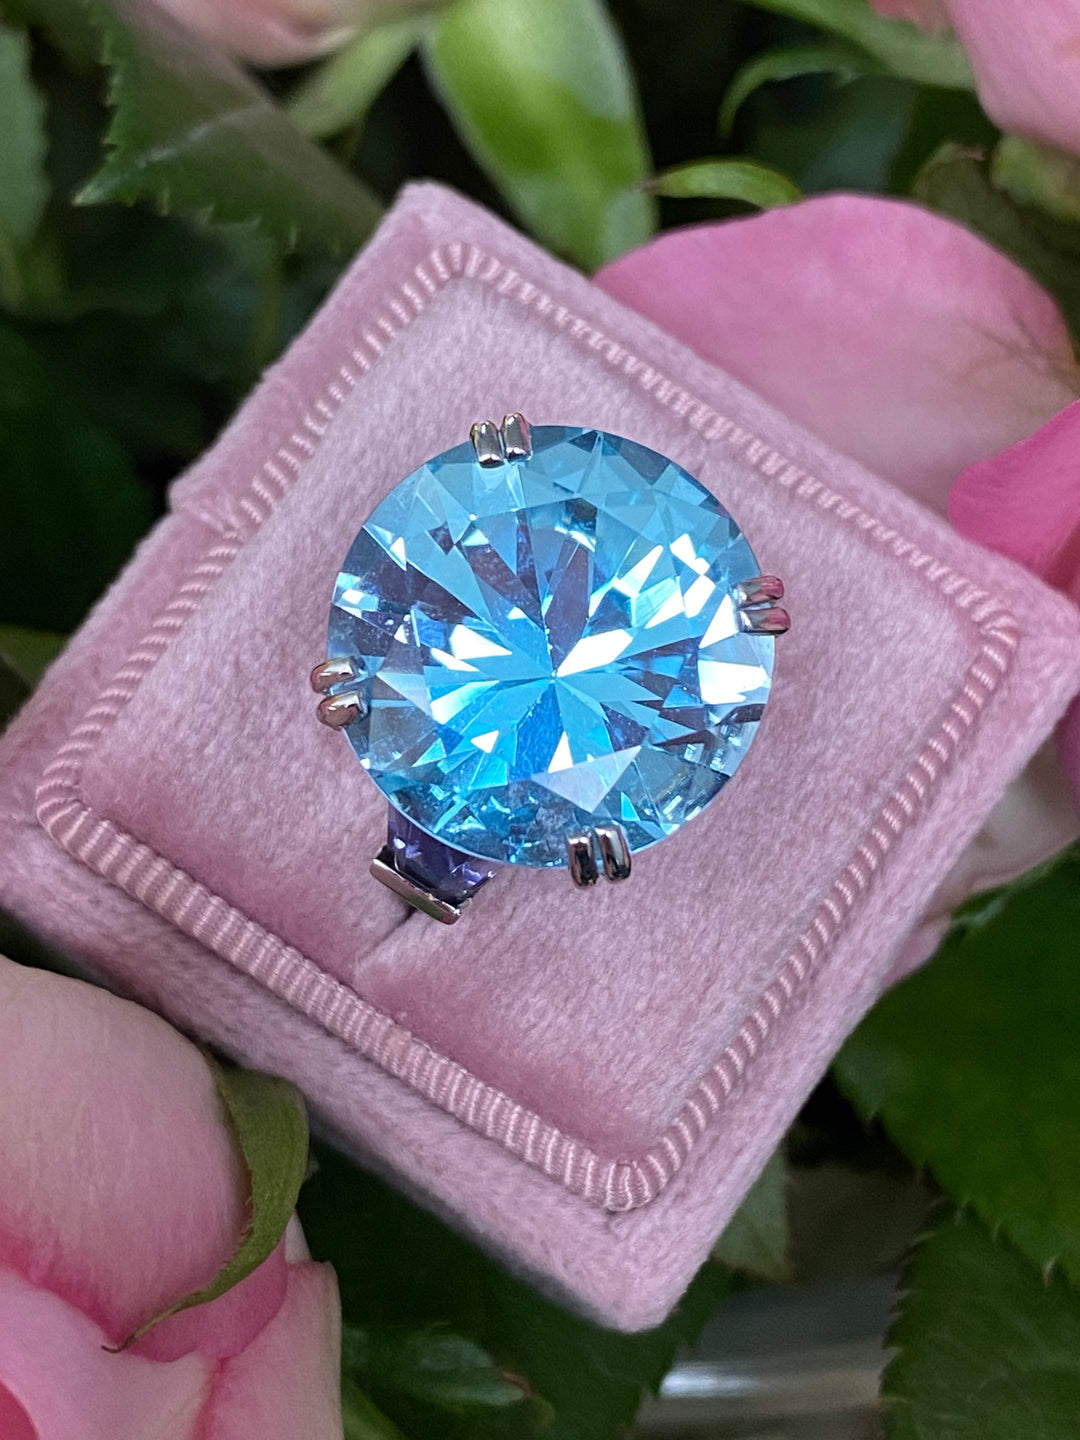 Fabulous French Blue Topaz and Iolite Ring in 18ct White Gold